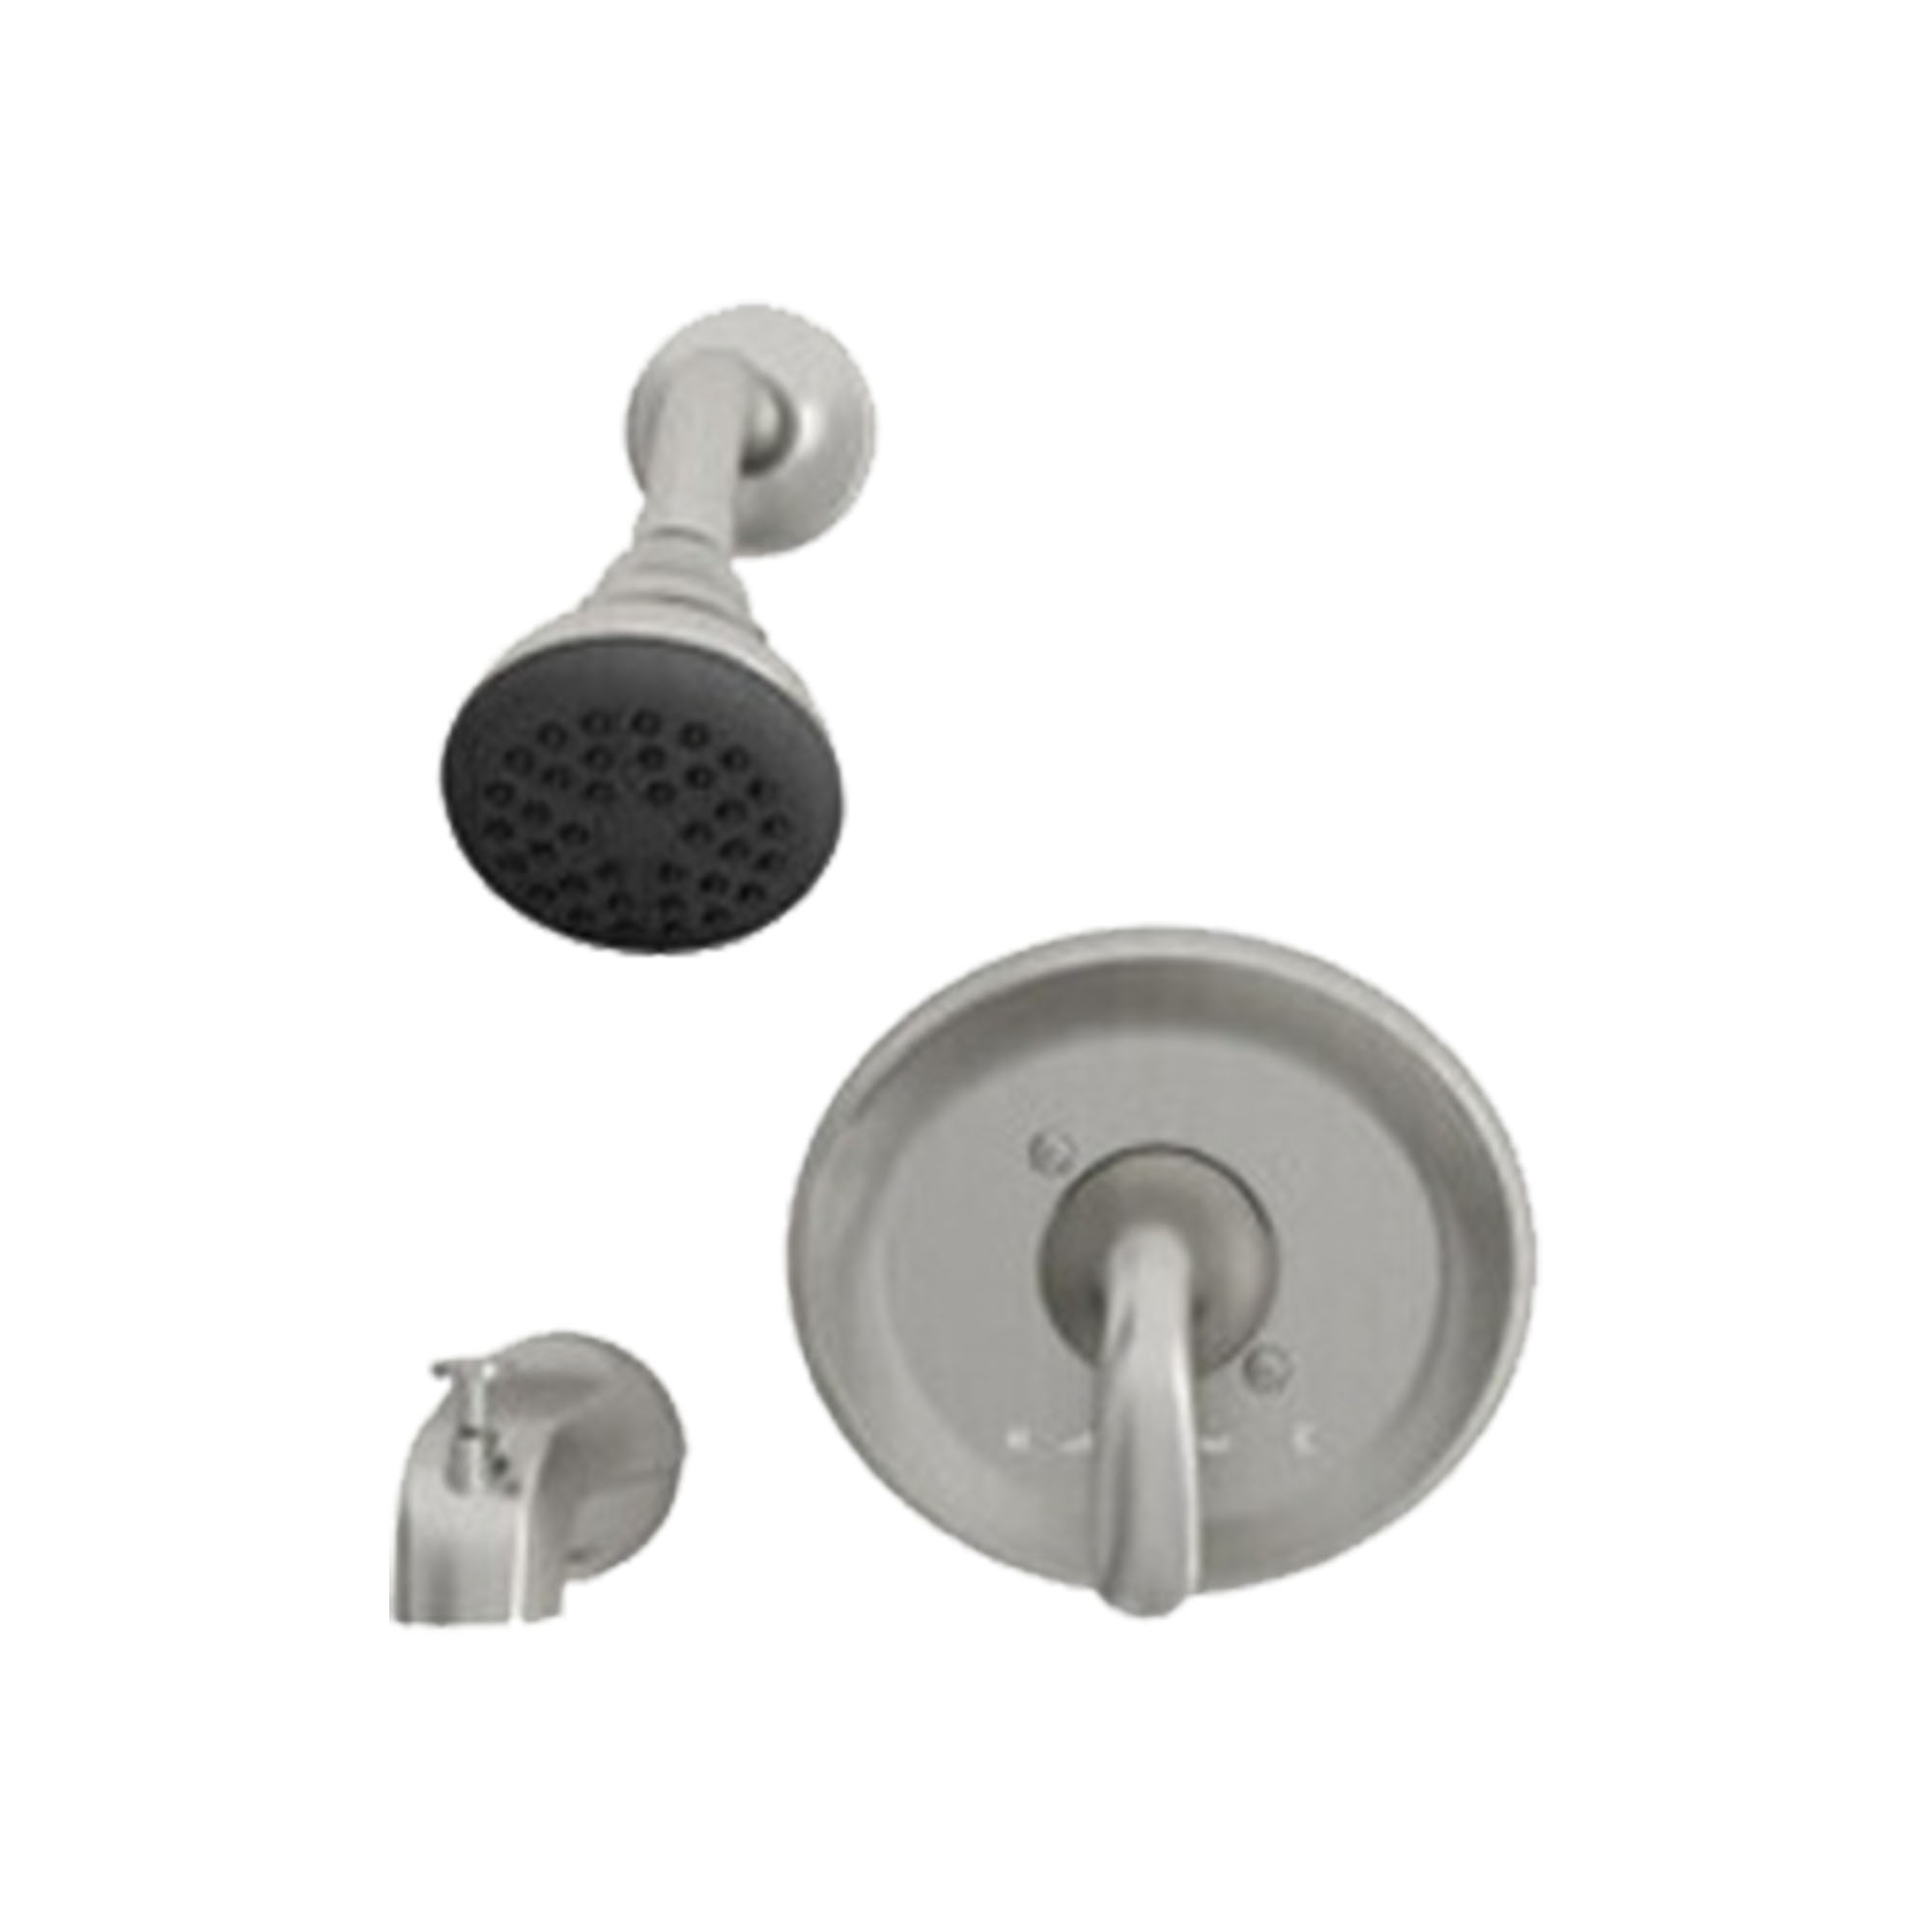 Cadet 2.0 GPM Tub and Shower Trim Kit with Ceramic Disc Valve Cartridge and Lever Handle